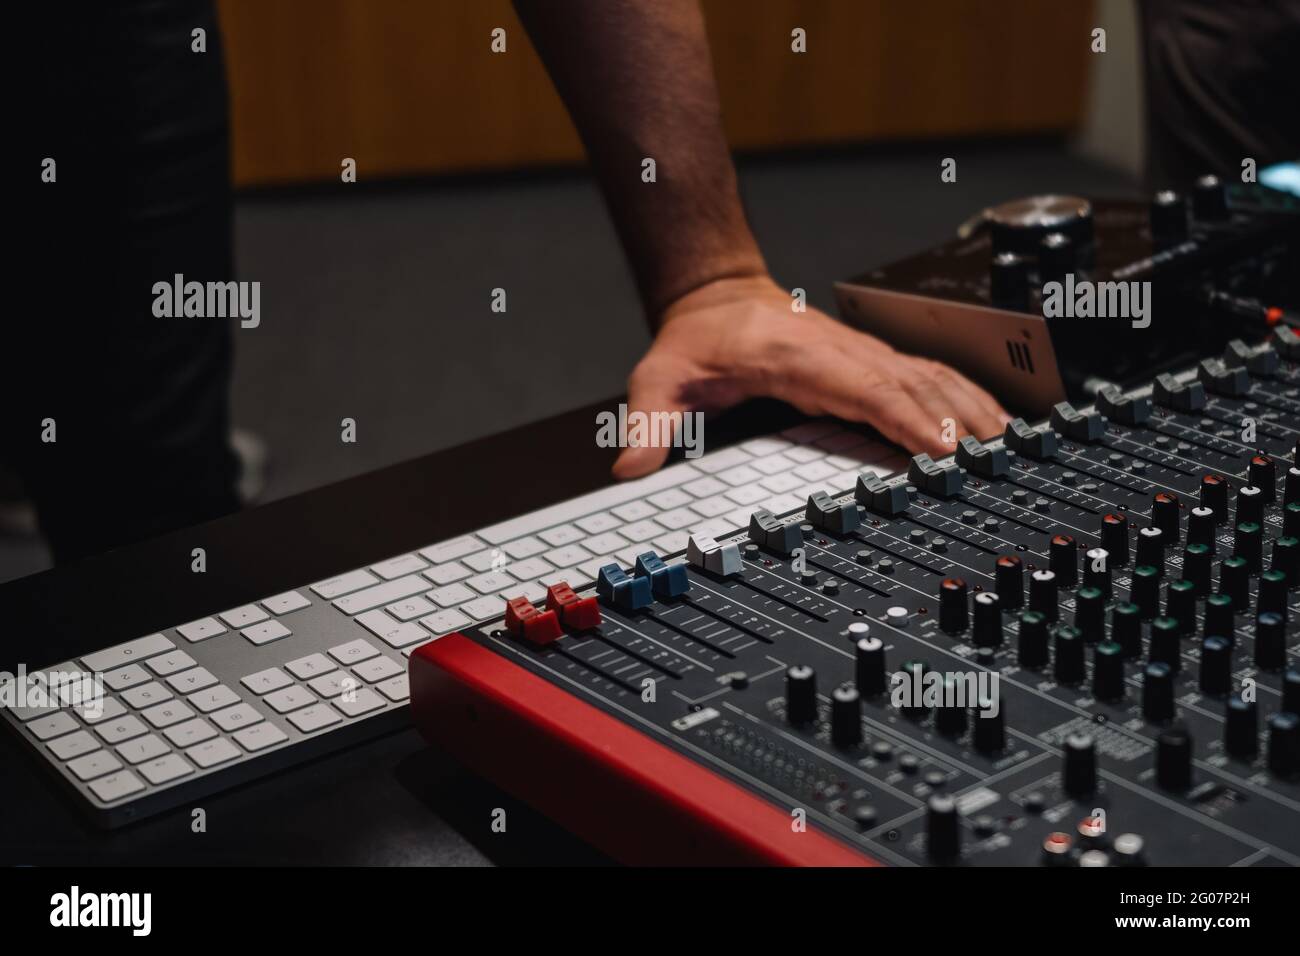 Producer's hands at the keyboard in a studio. Musician arranging and mixing music in home studio. Music production equipment. Stock Photo